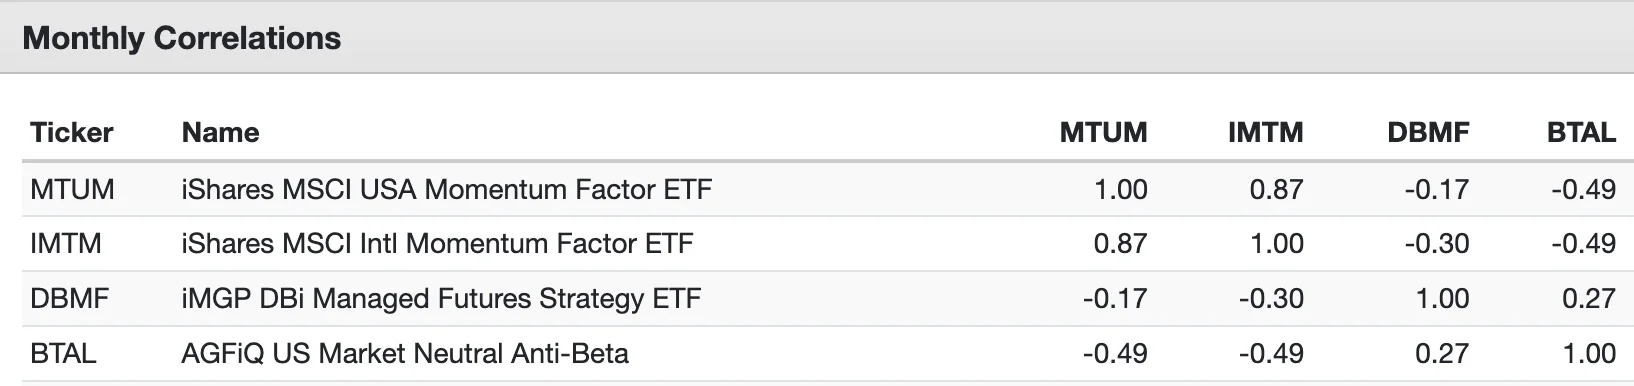 MTUM and Friends ETF Monthly Correlations 